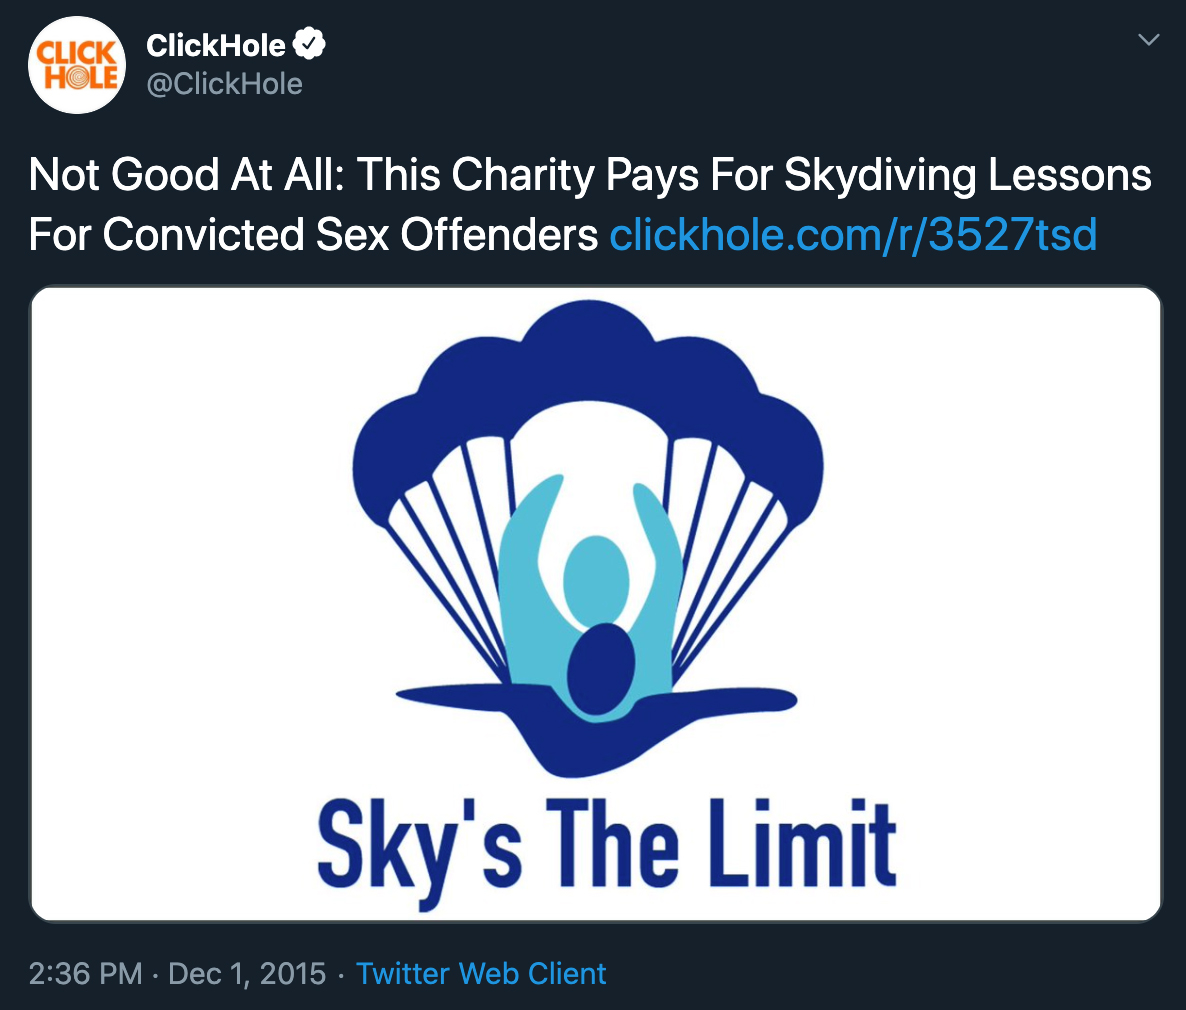 clickhole headlines - Not Good At All This Charity Pays For Skydiving Lessons For Convicted Sex Offenders